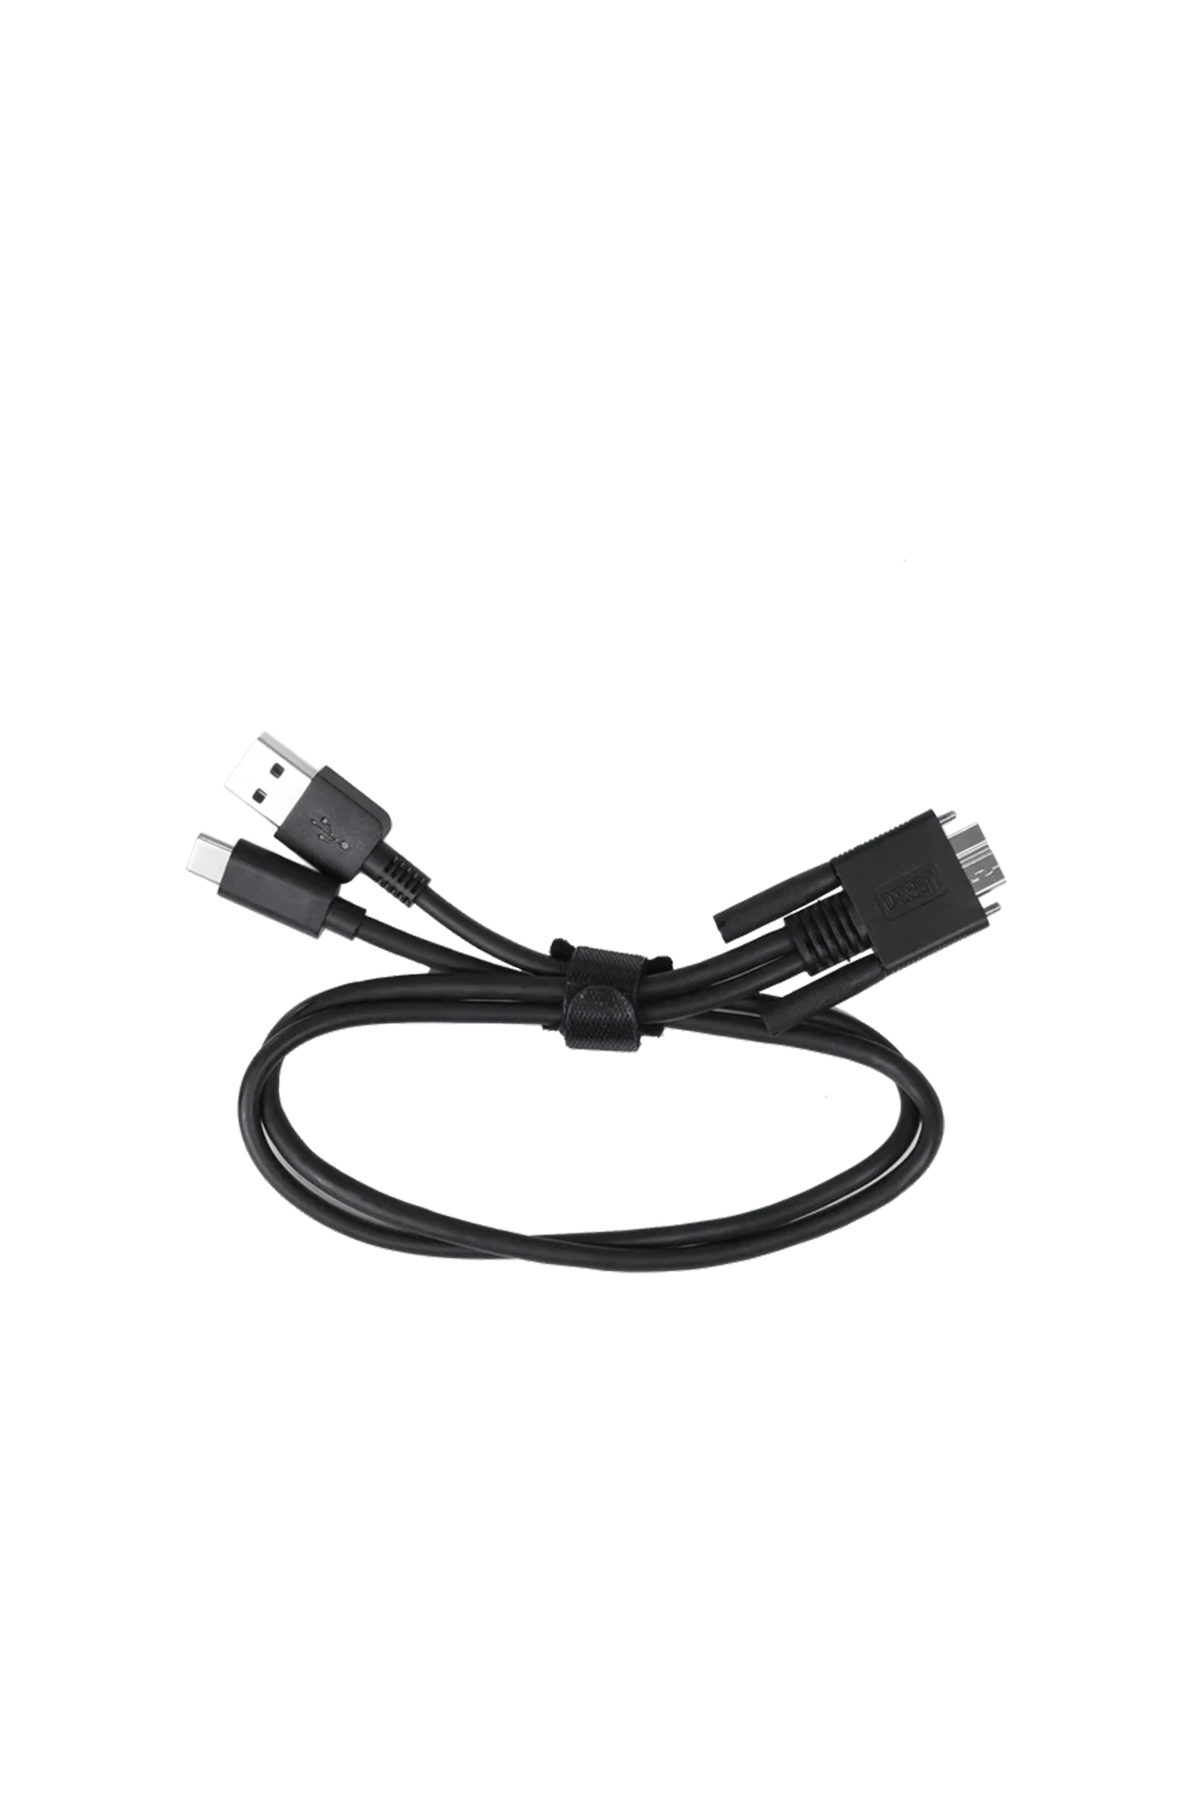 Revopoint 2-in-1 Mobile Cable